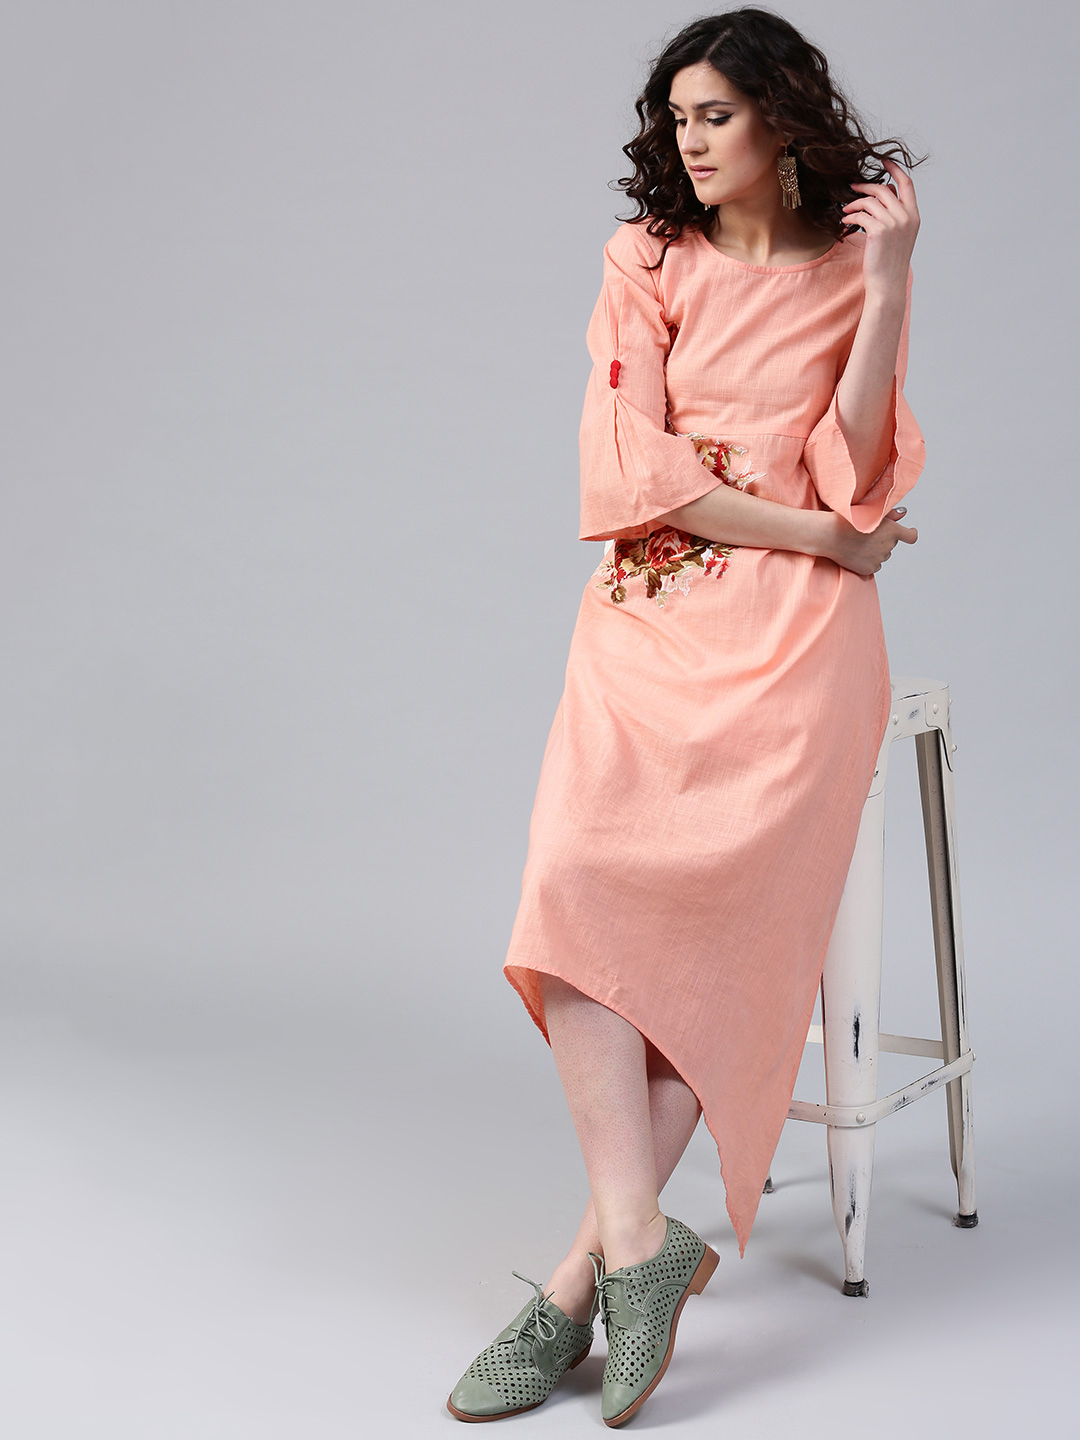 AKS Women Peach-Coloured Printed A-Line Dress Price in India